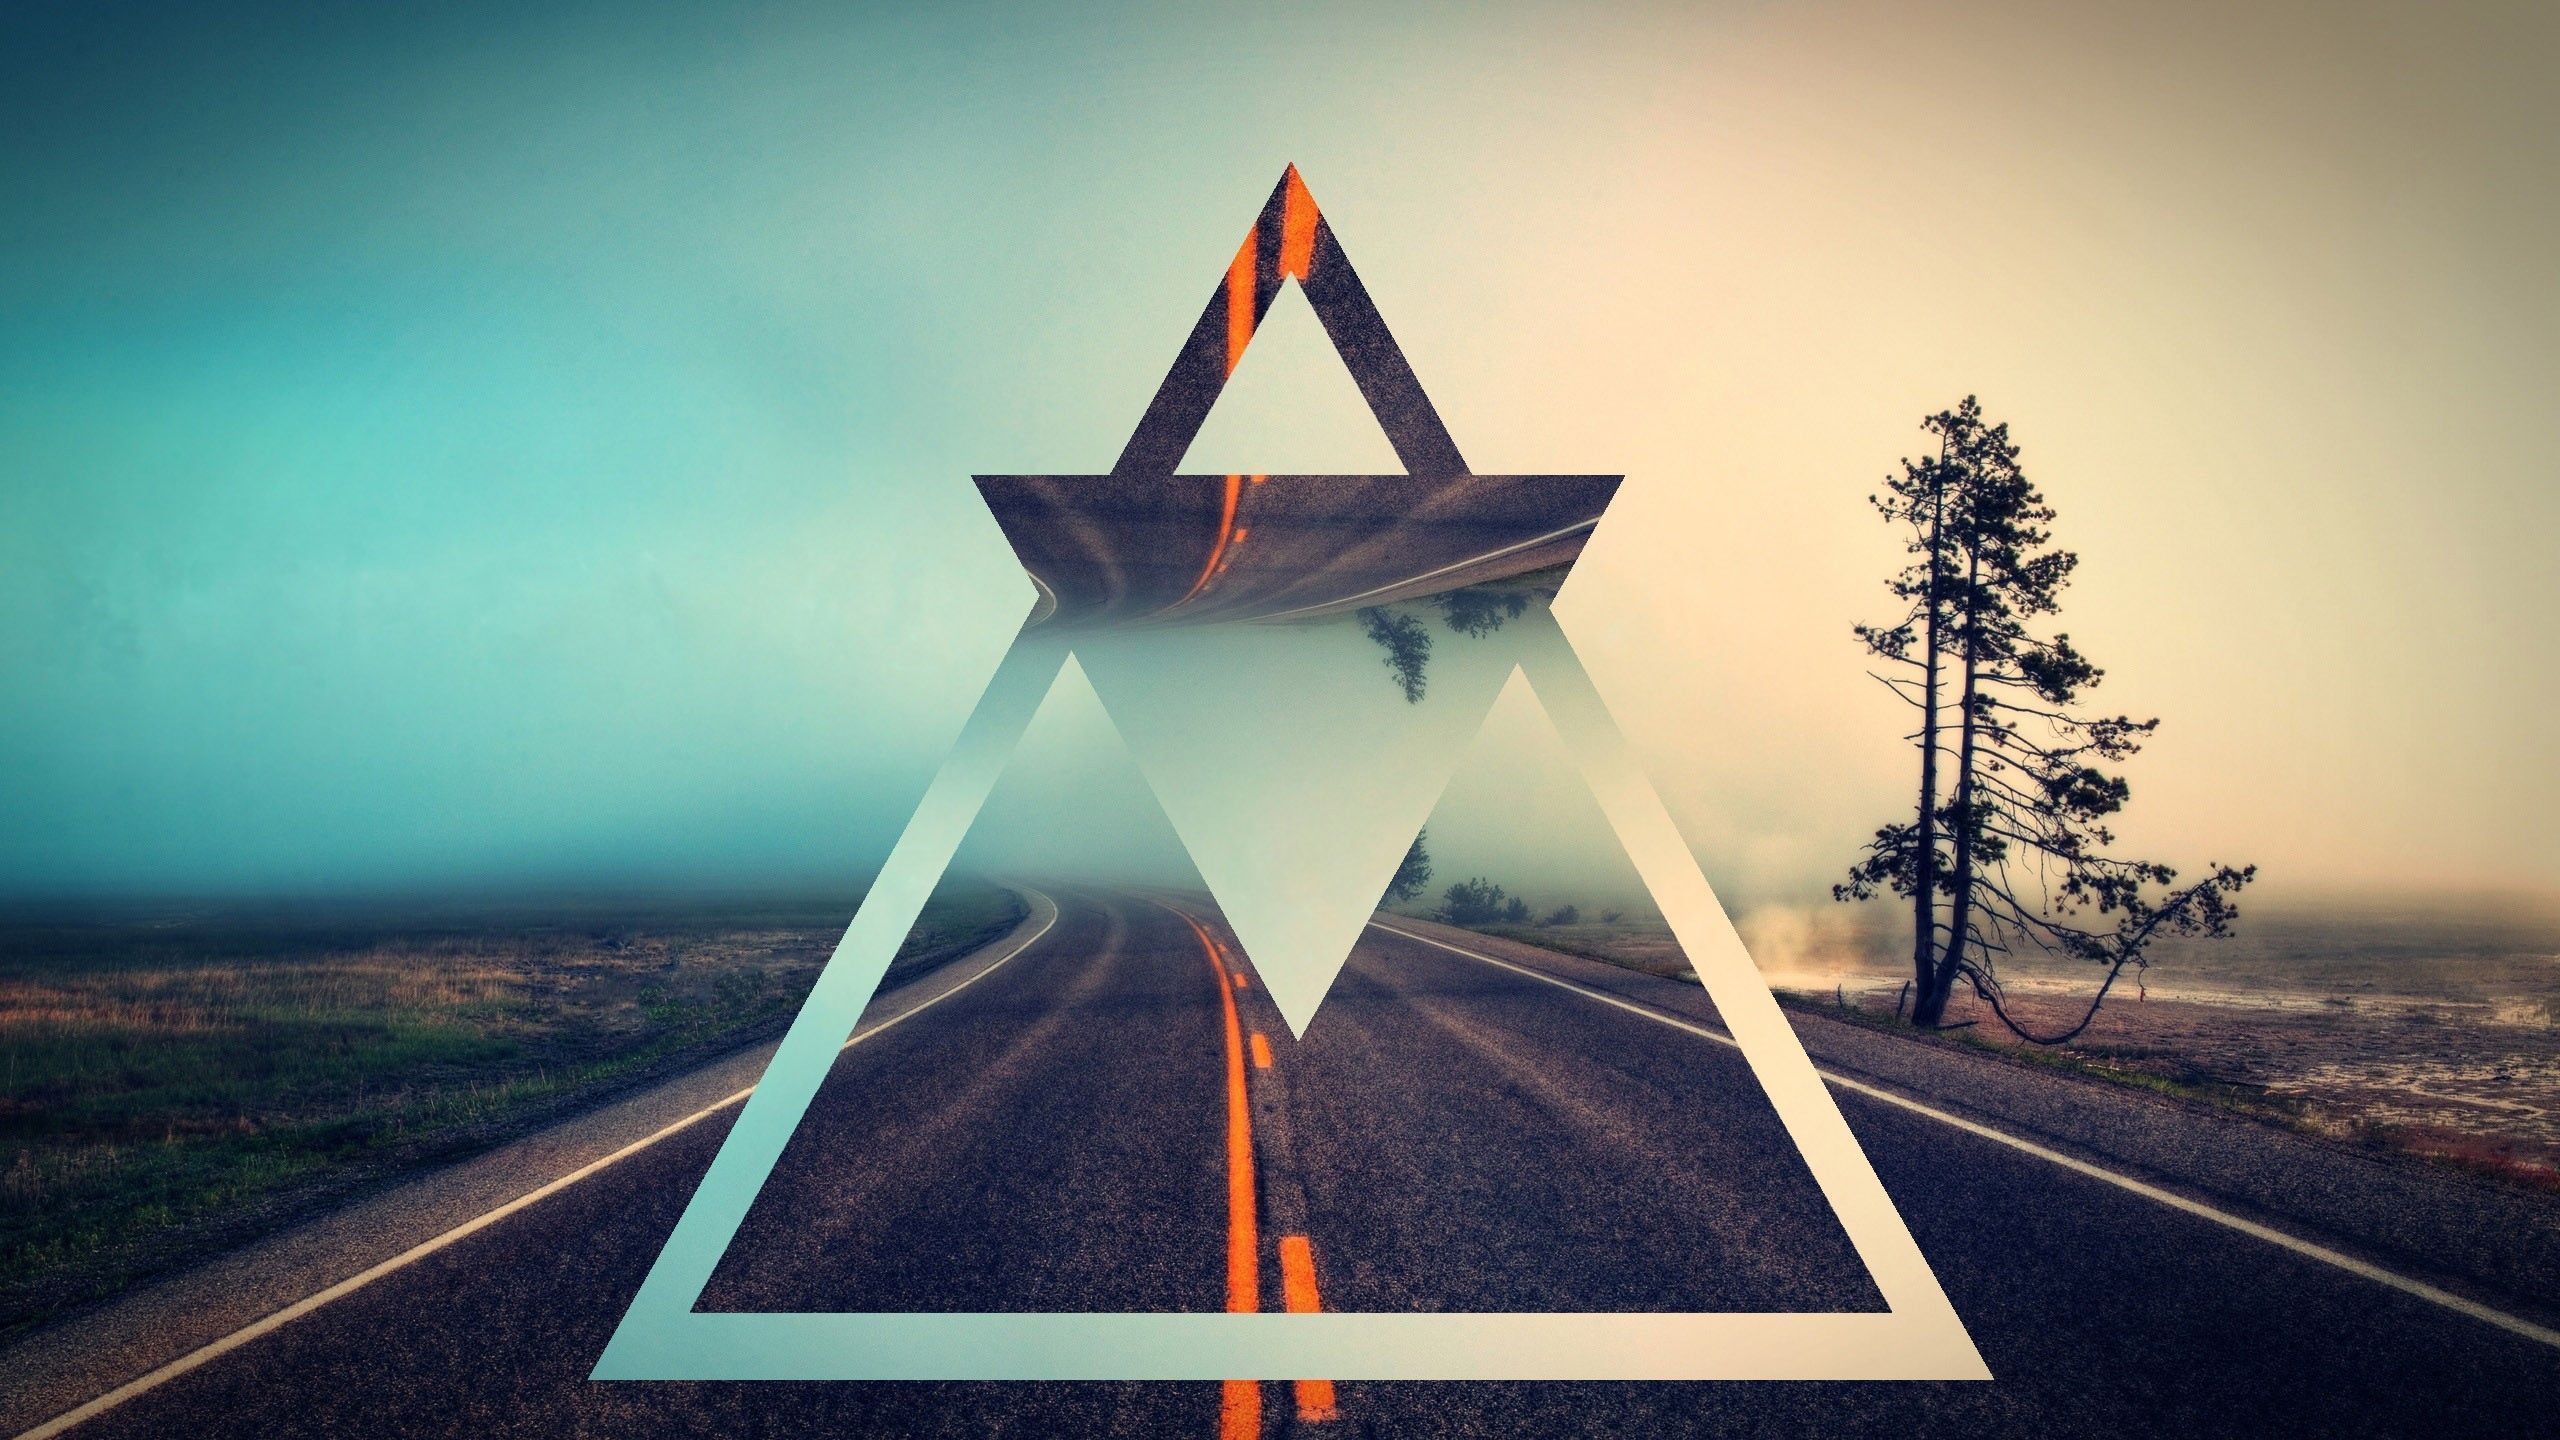 Download Wallpaper 2560x1440 Triangle, Shape, Background, Bright ...